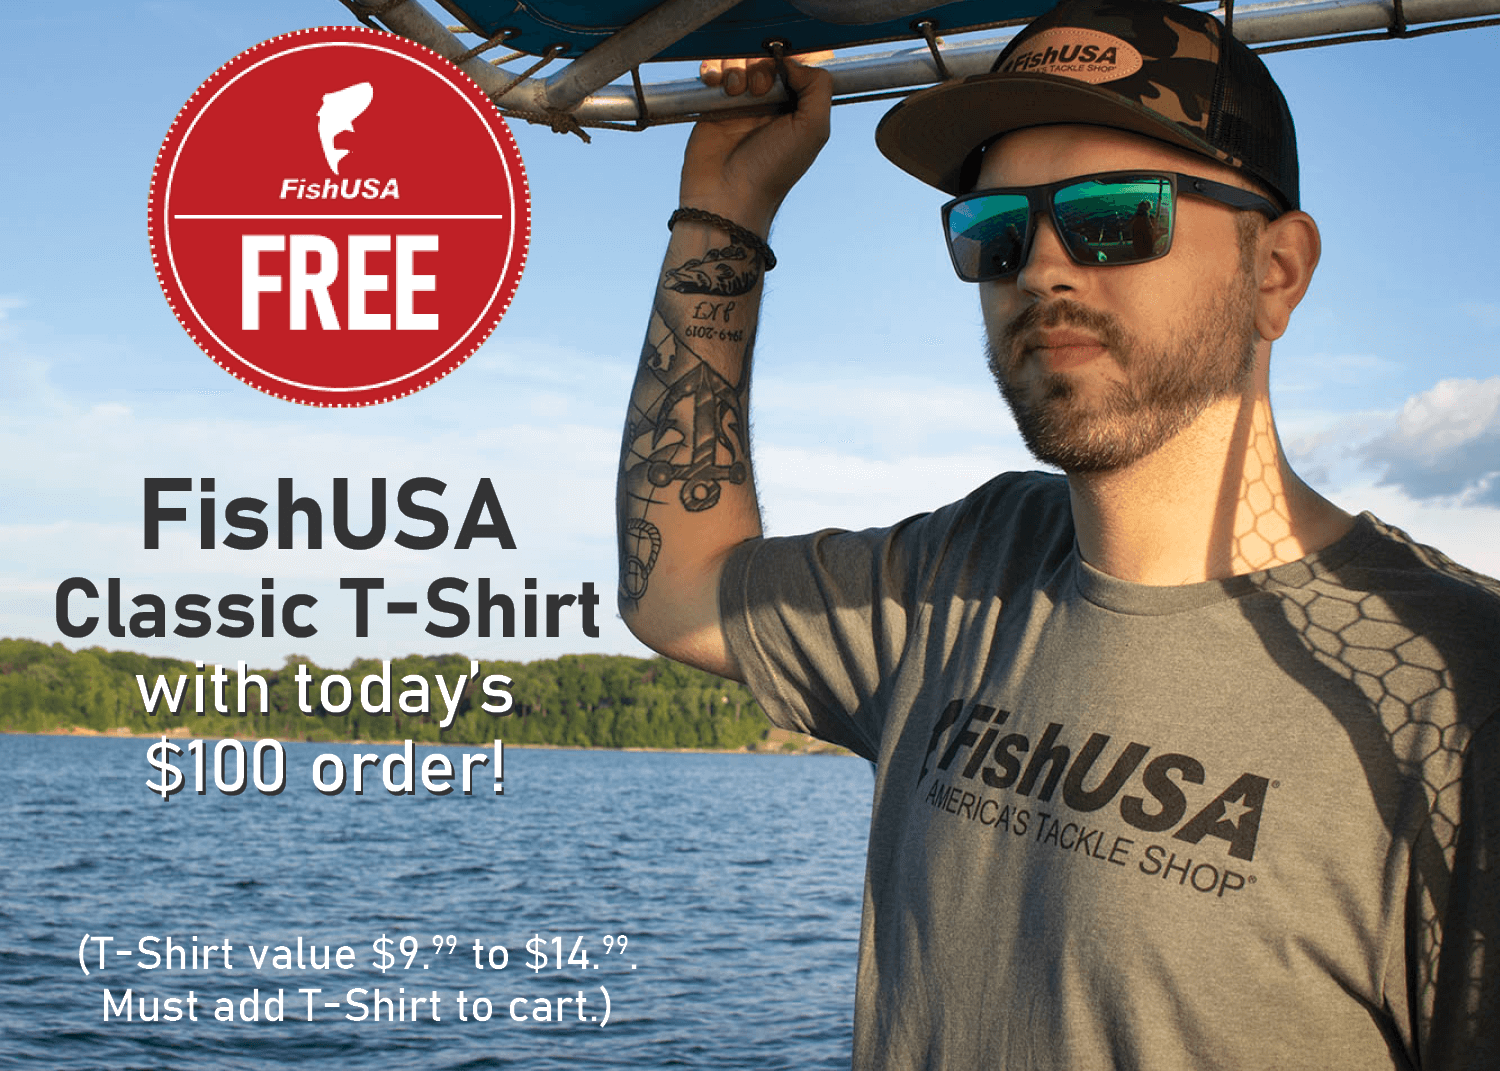 Get a FREE FishUSA Men's Classic T-Shirt with today's $100 order!